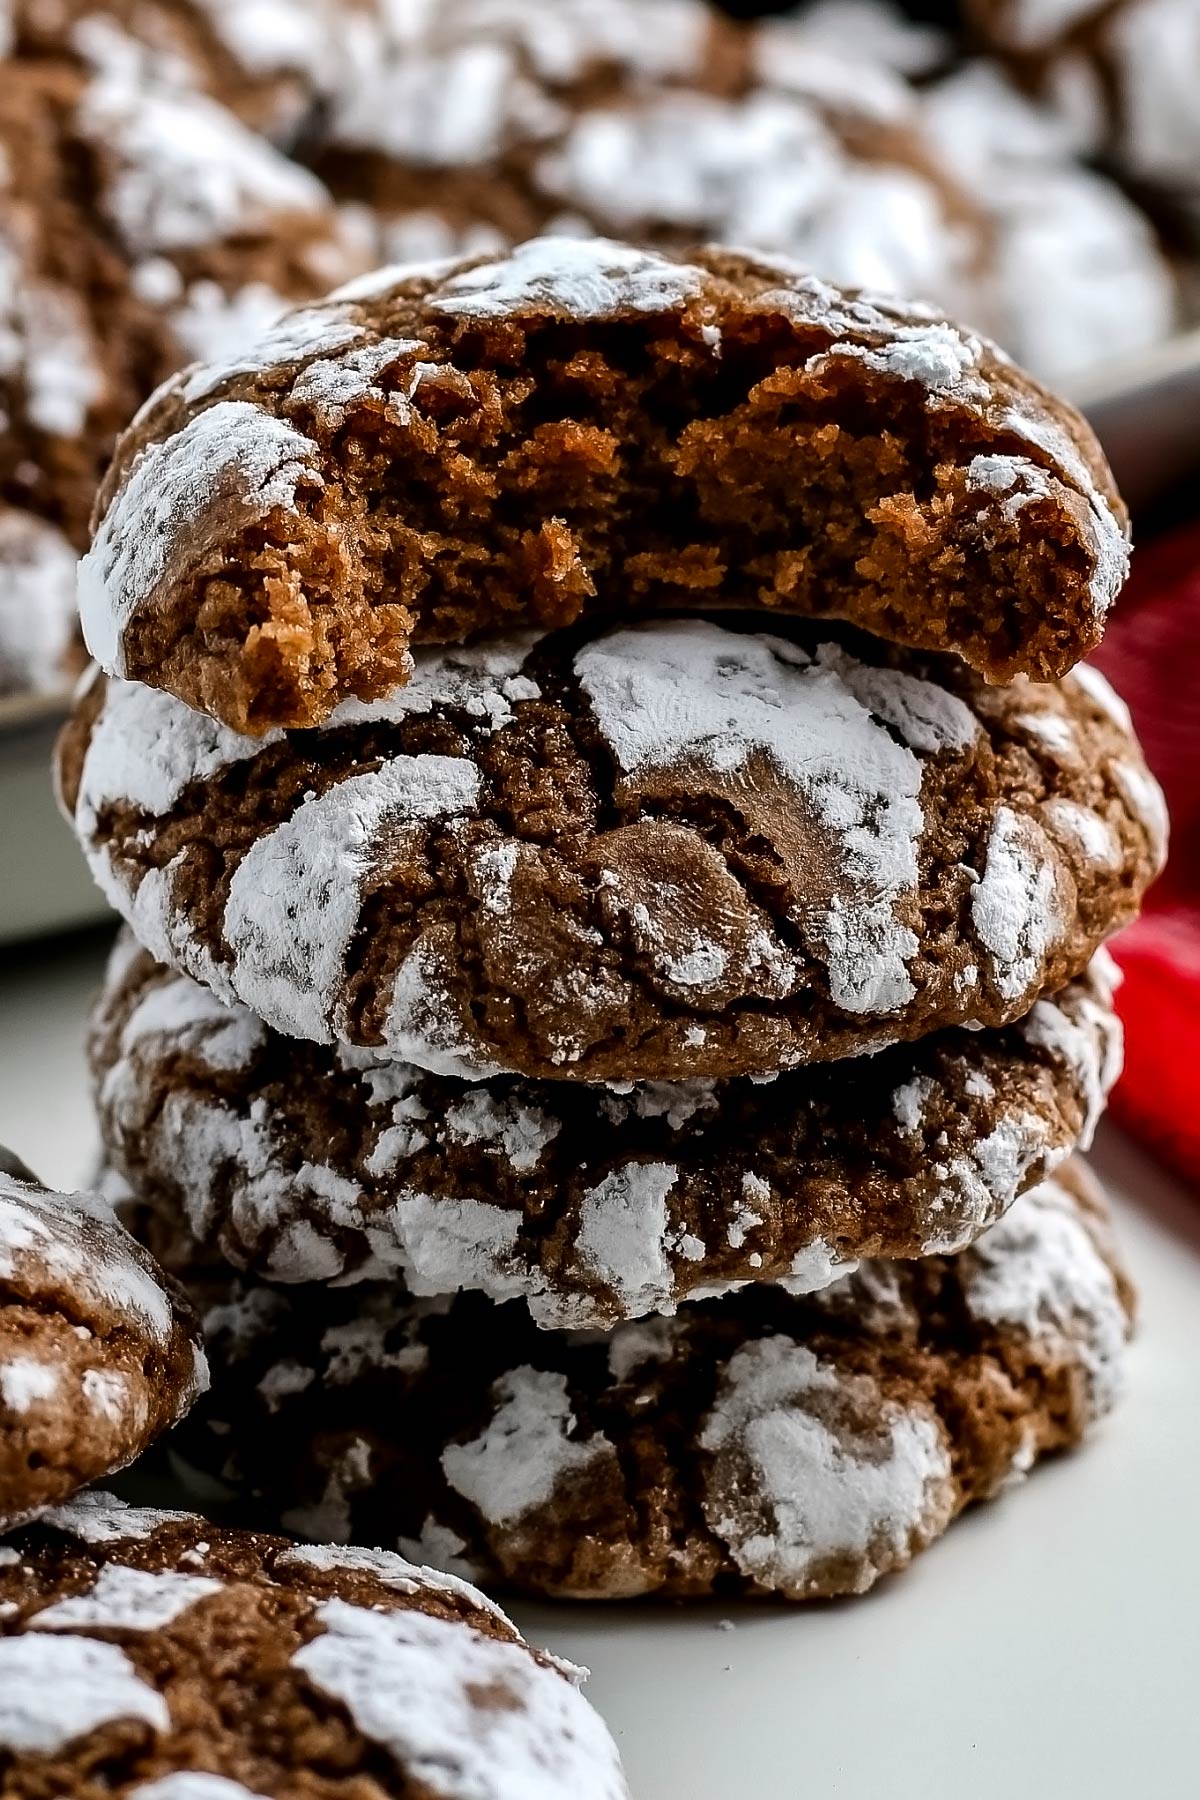 Chocolate Crinkle Cookies - Easy Budget Recipes